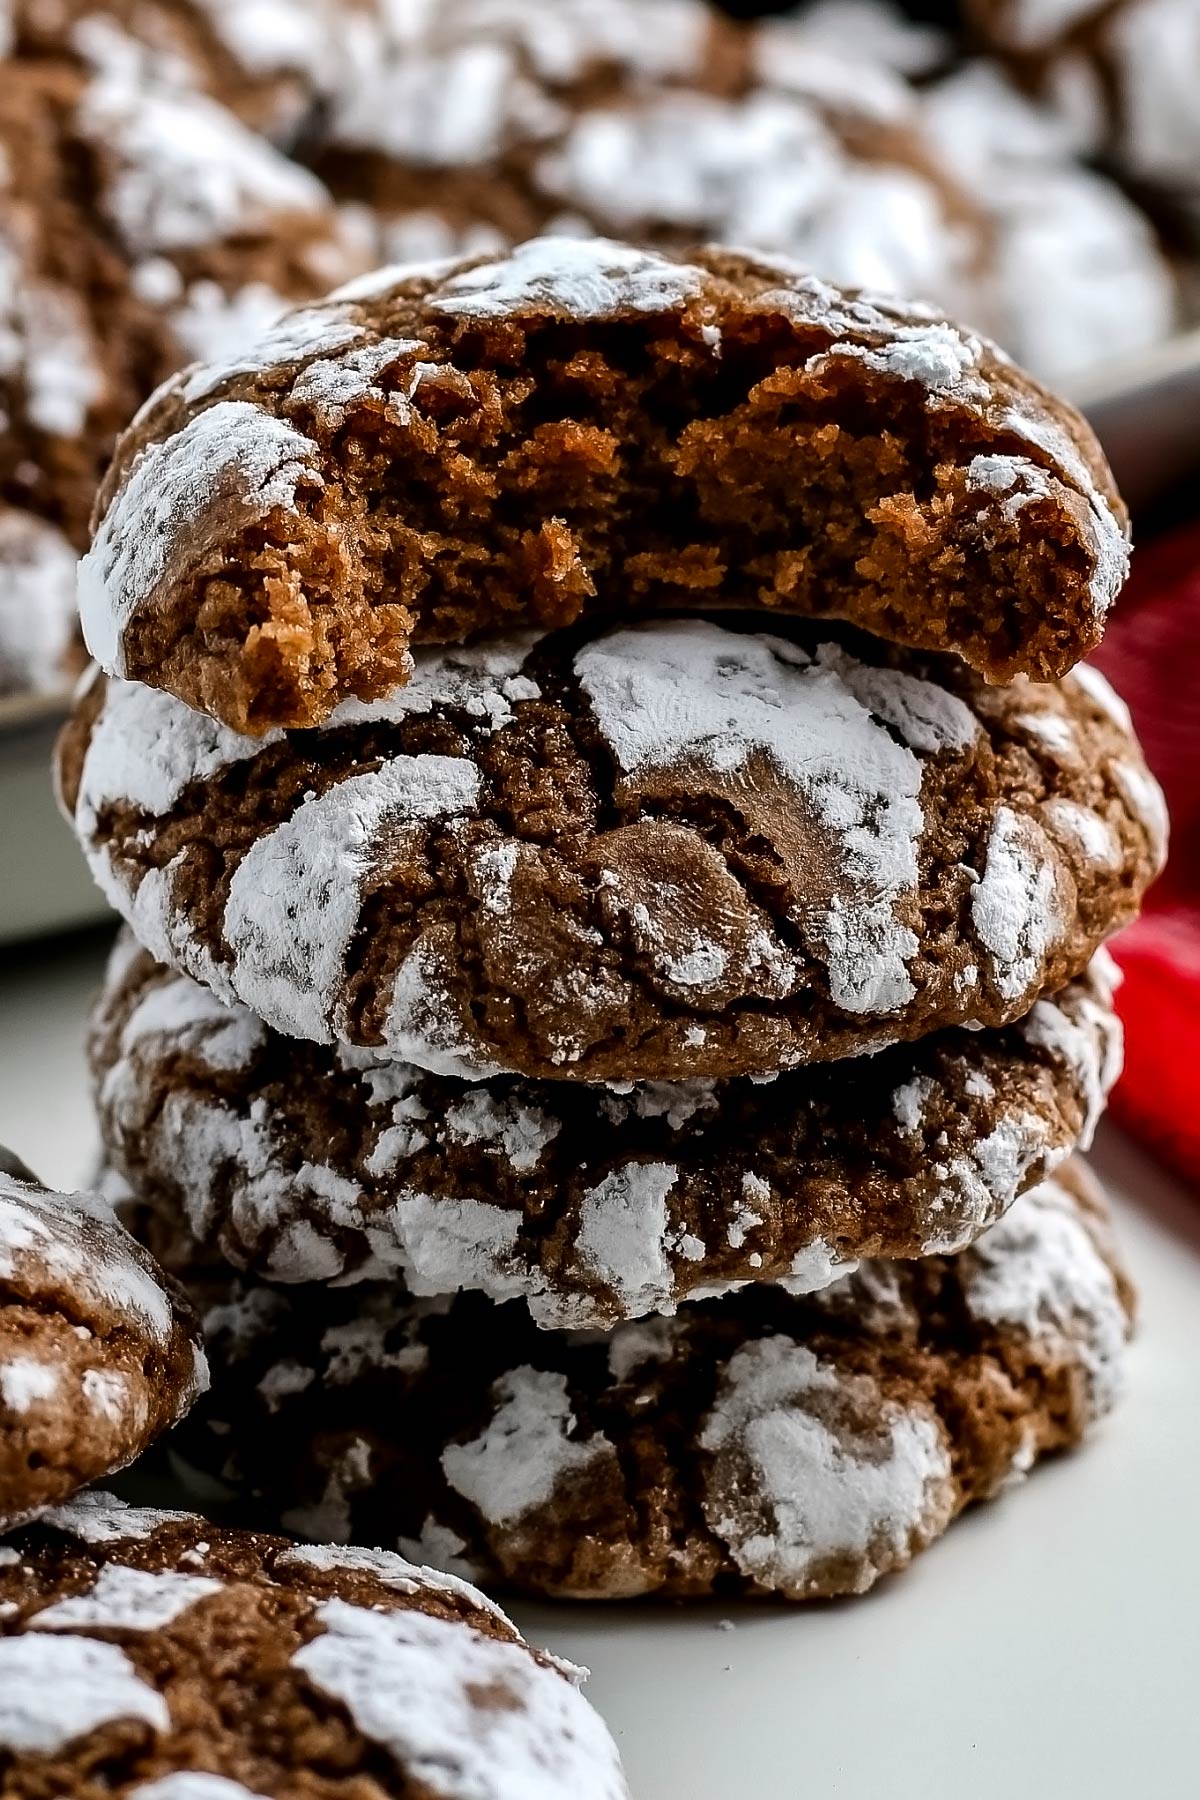 Chocolate Crinkle Cookies - Easy Budget Recipes